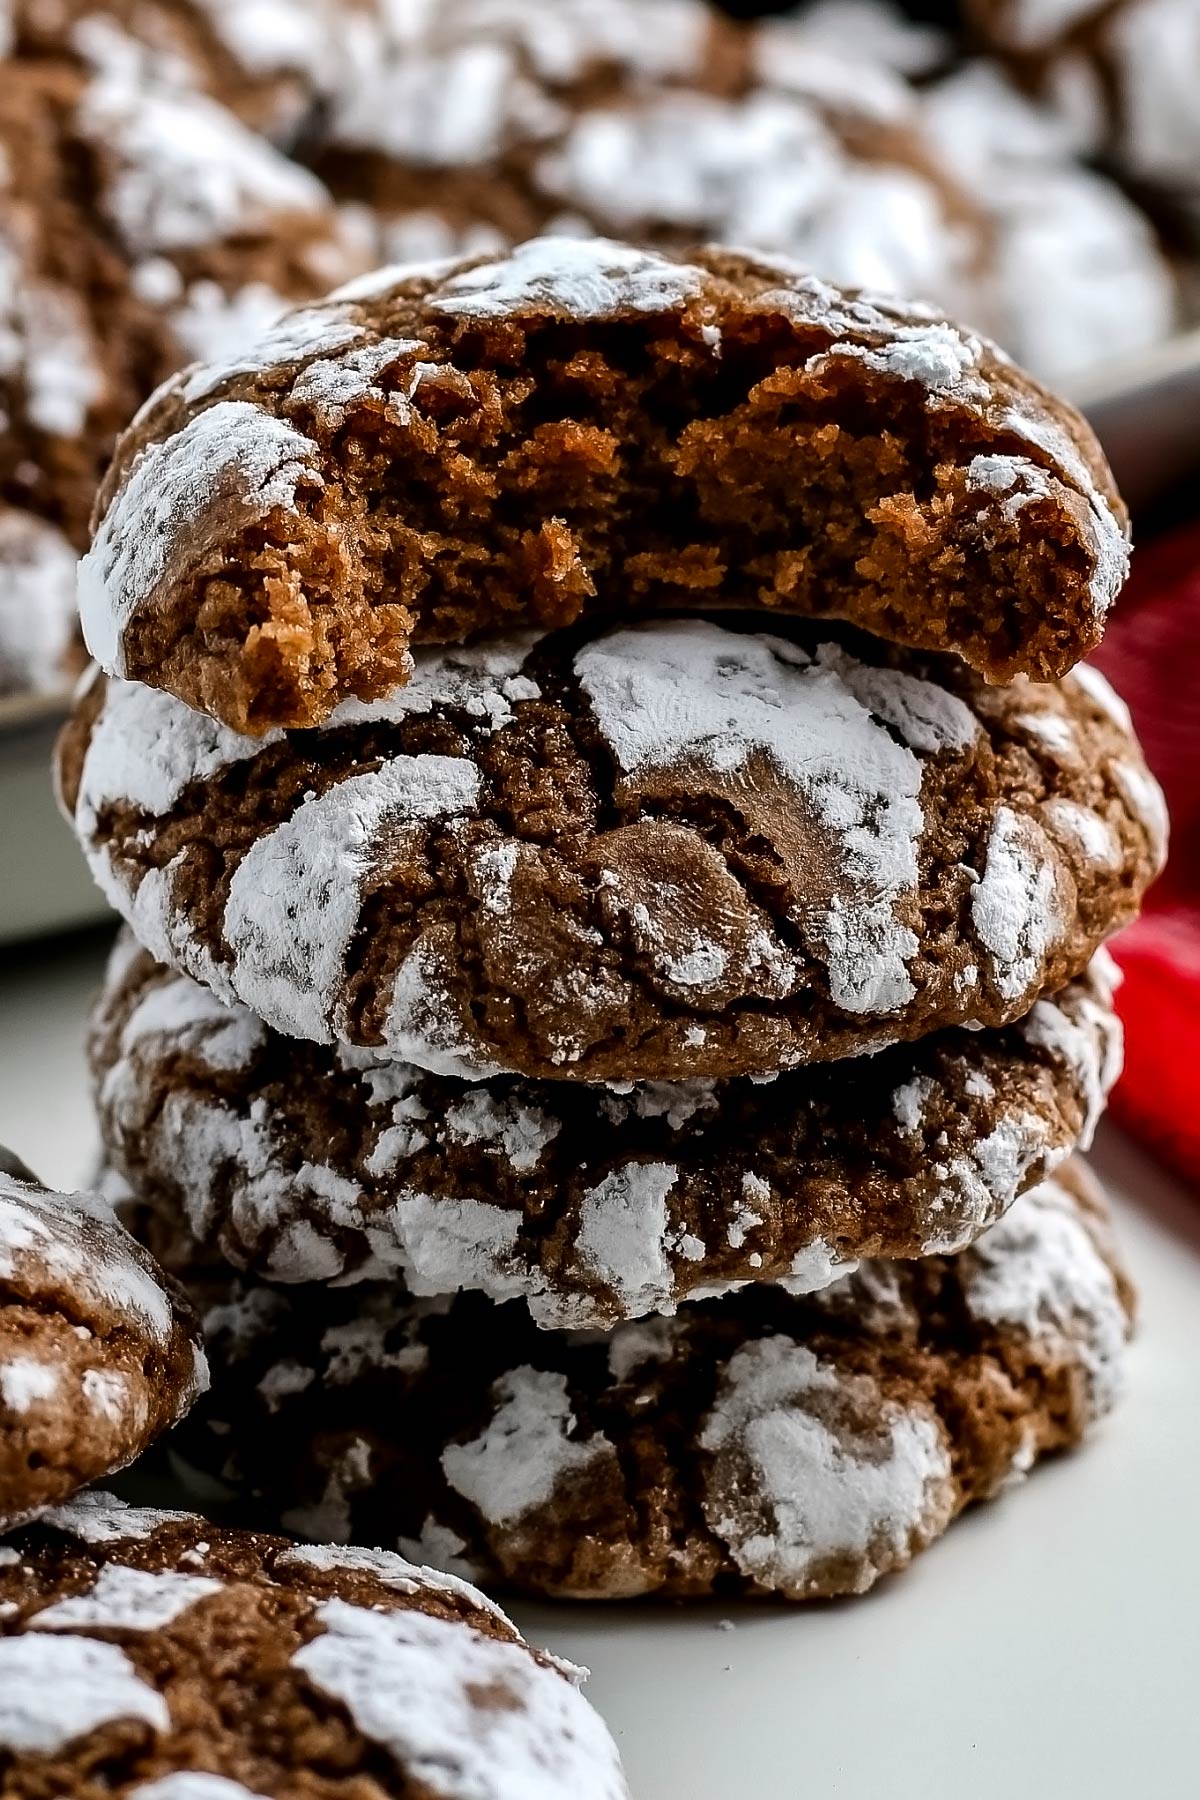 Chocolate Crinkle Cookies - Easy Budget Recipes